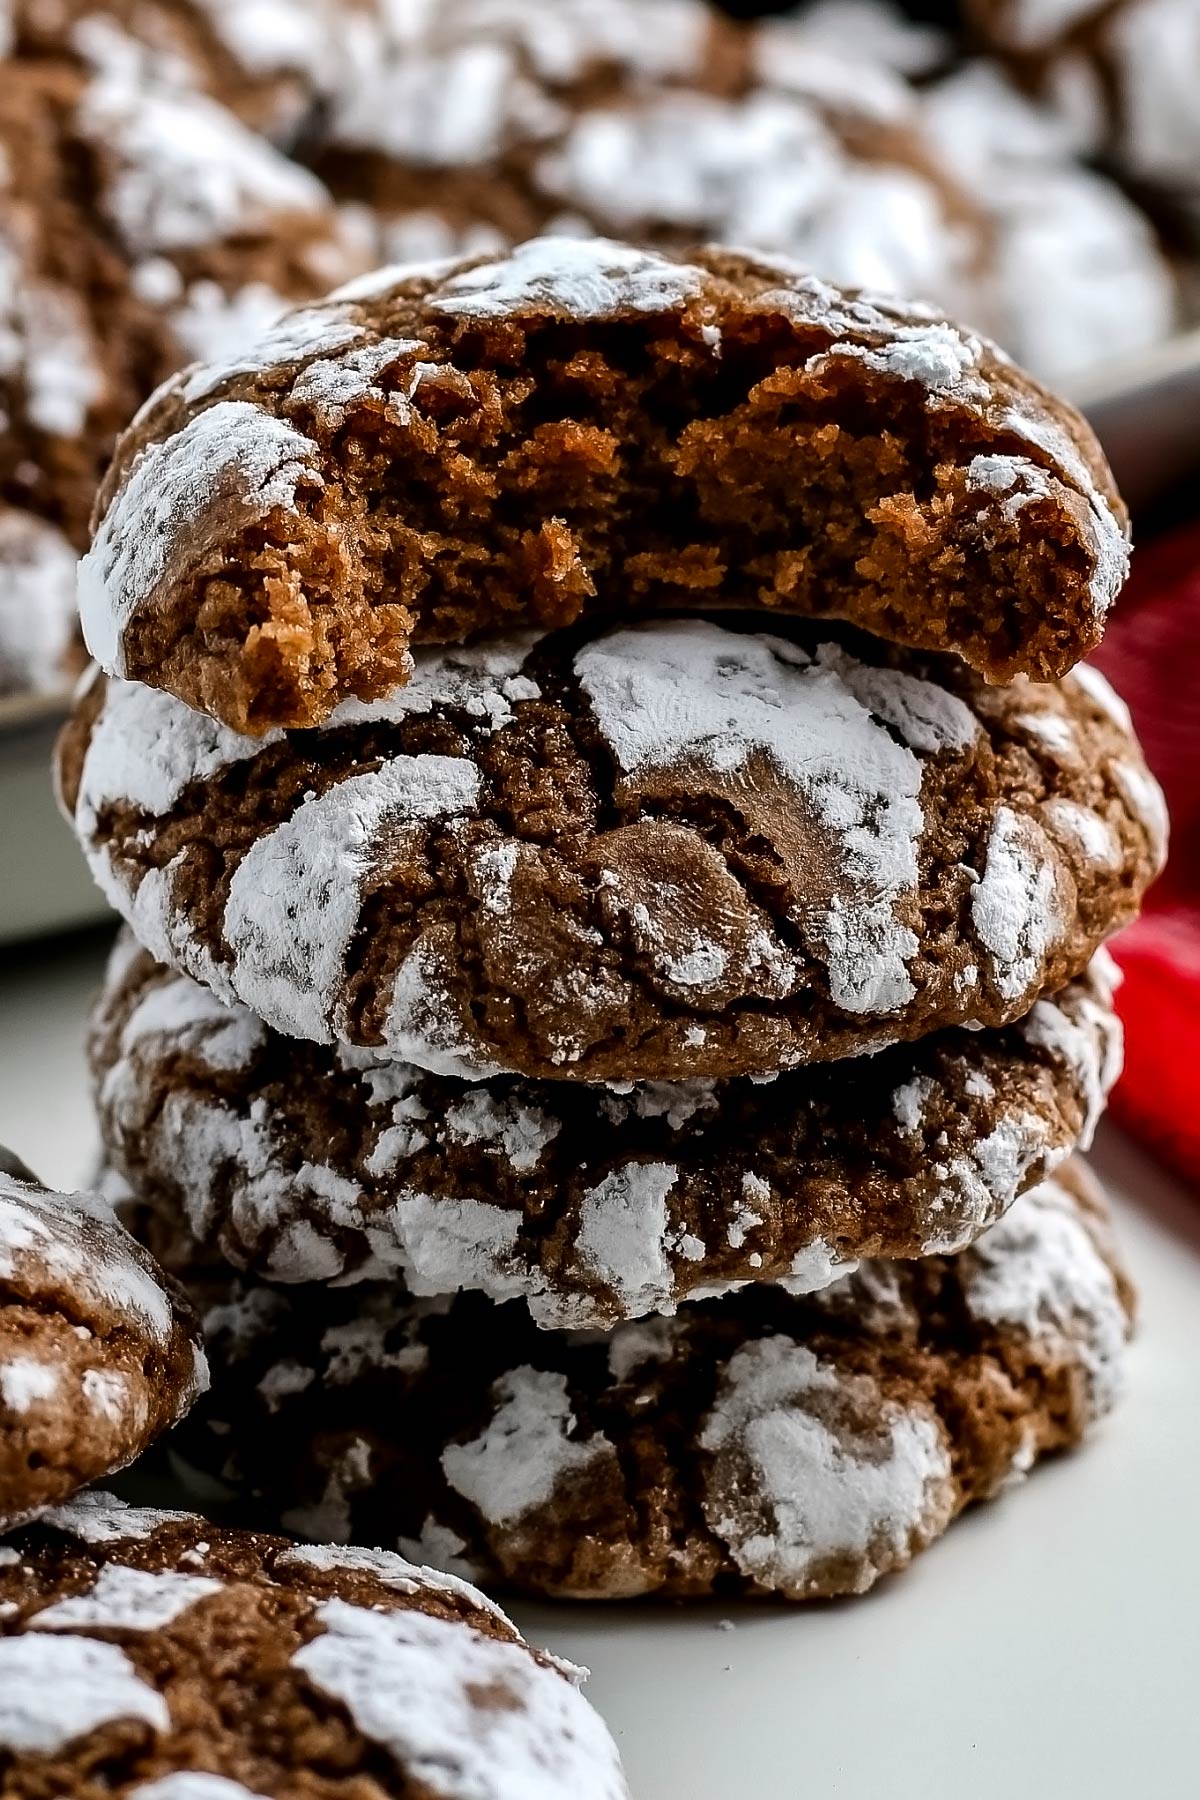 Chocolate Crinkle Cookies - Easy Budget Recipes